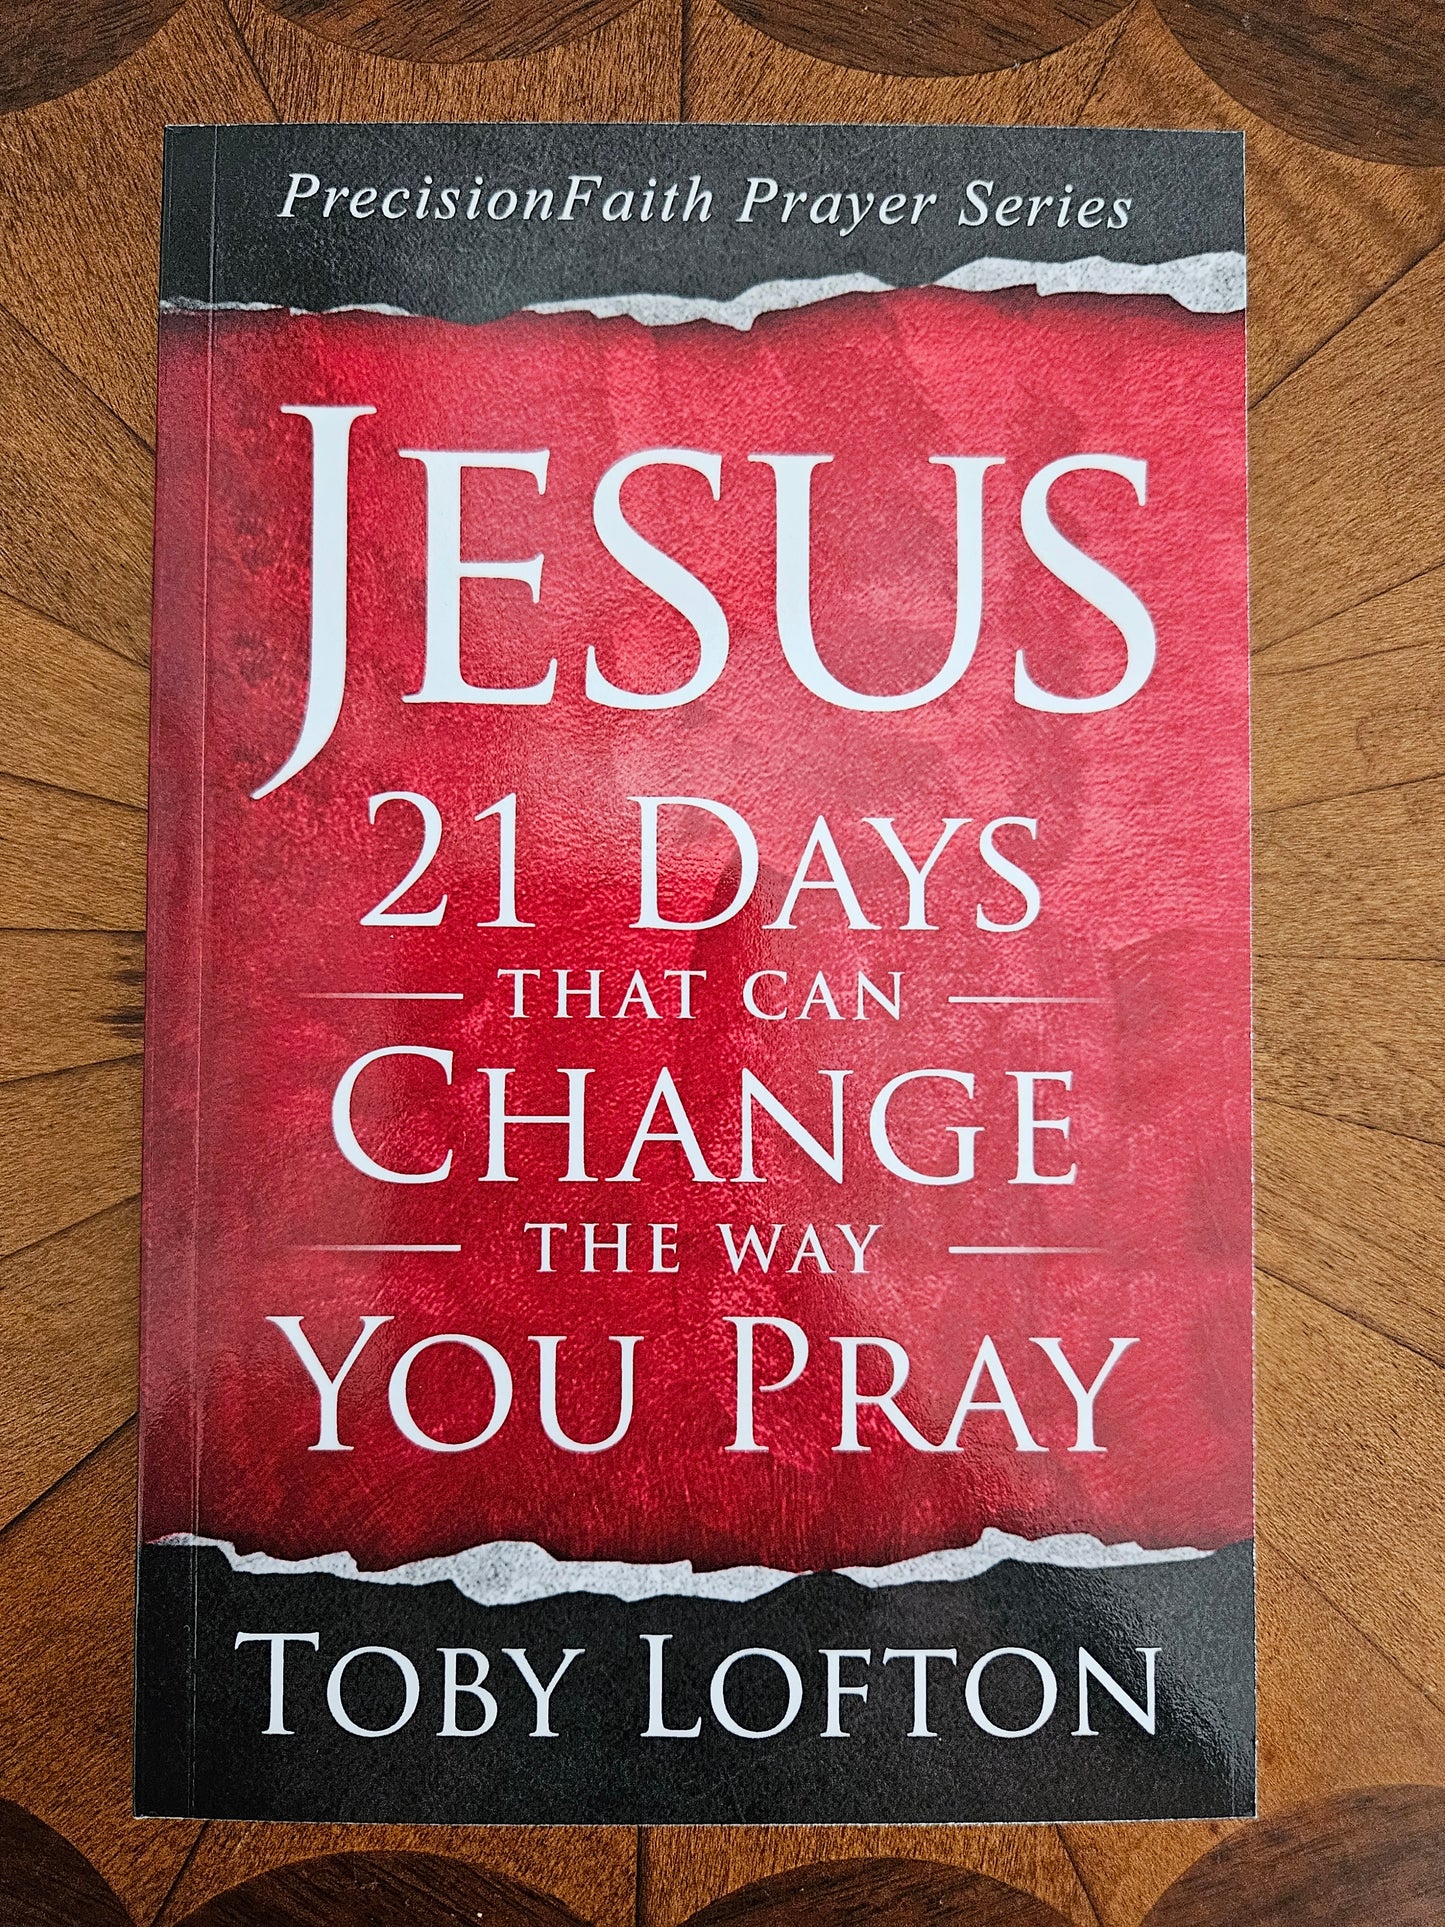 Jesus: 21 Days That Can Change the Way You Pray (Paperback)